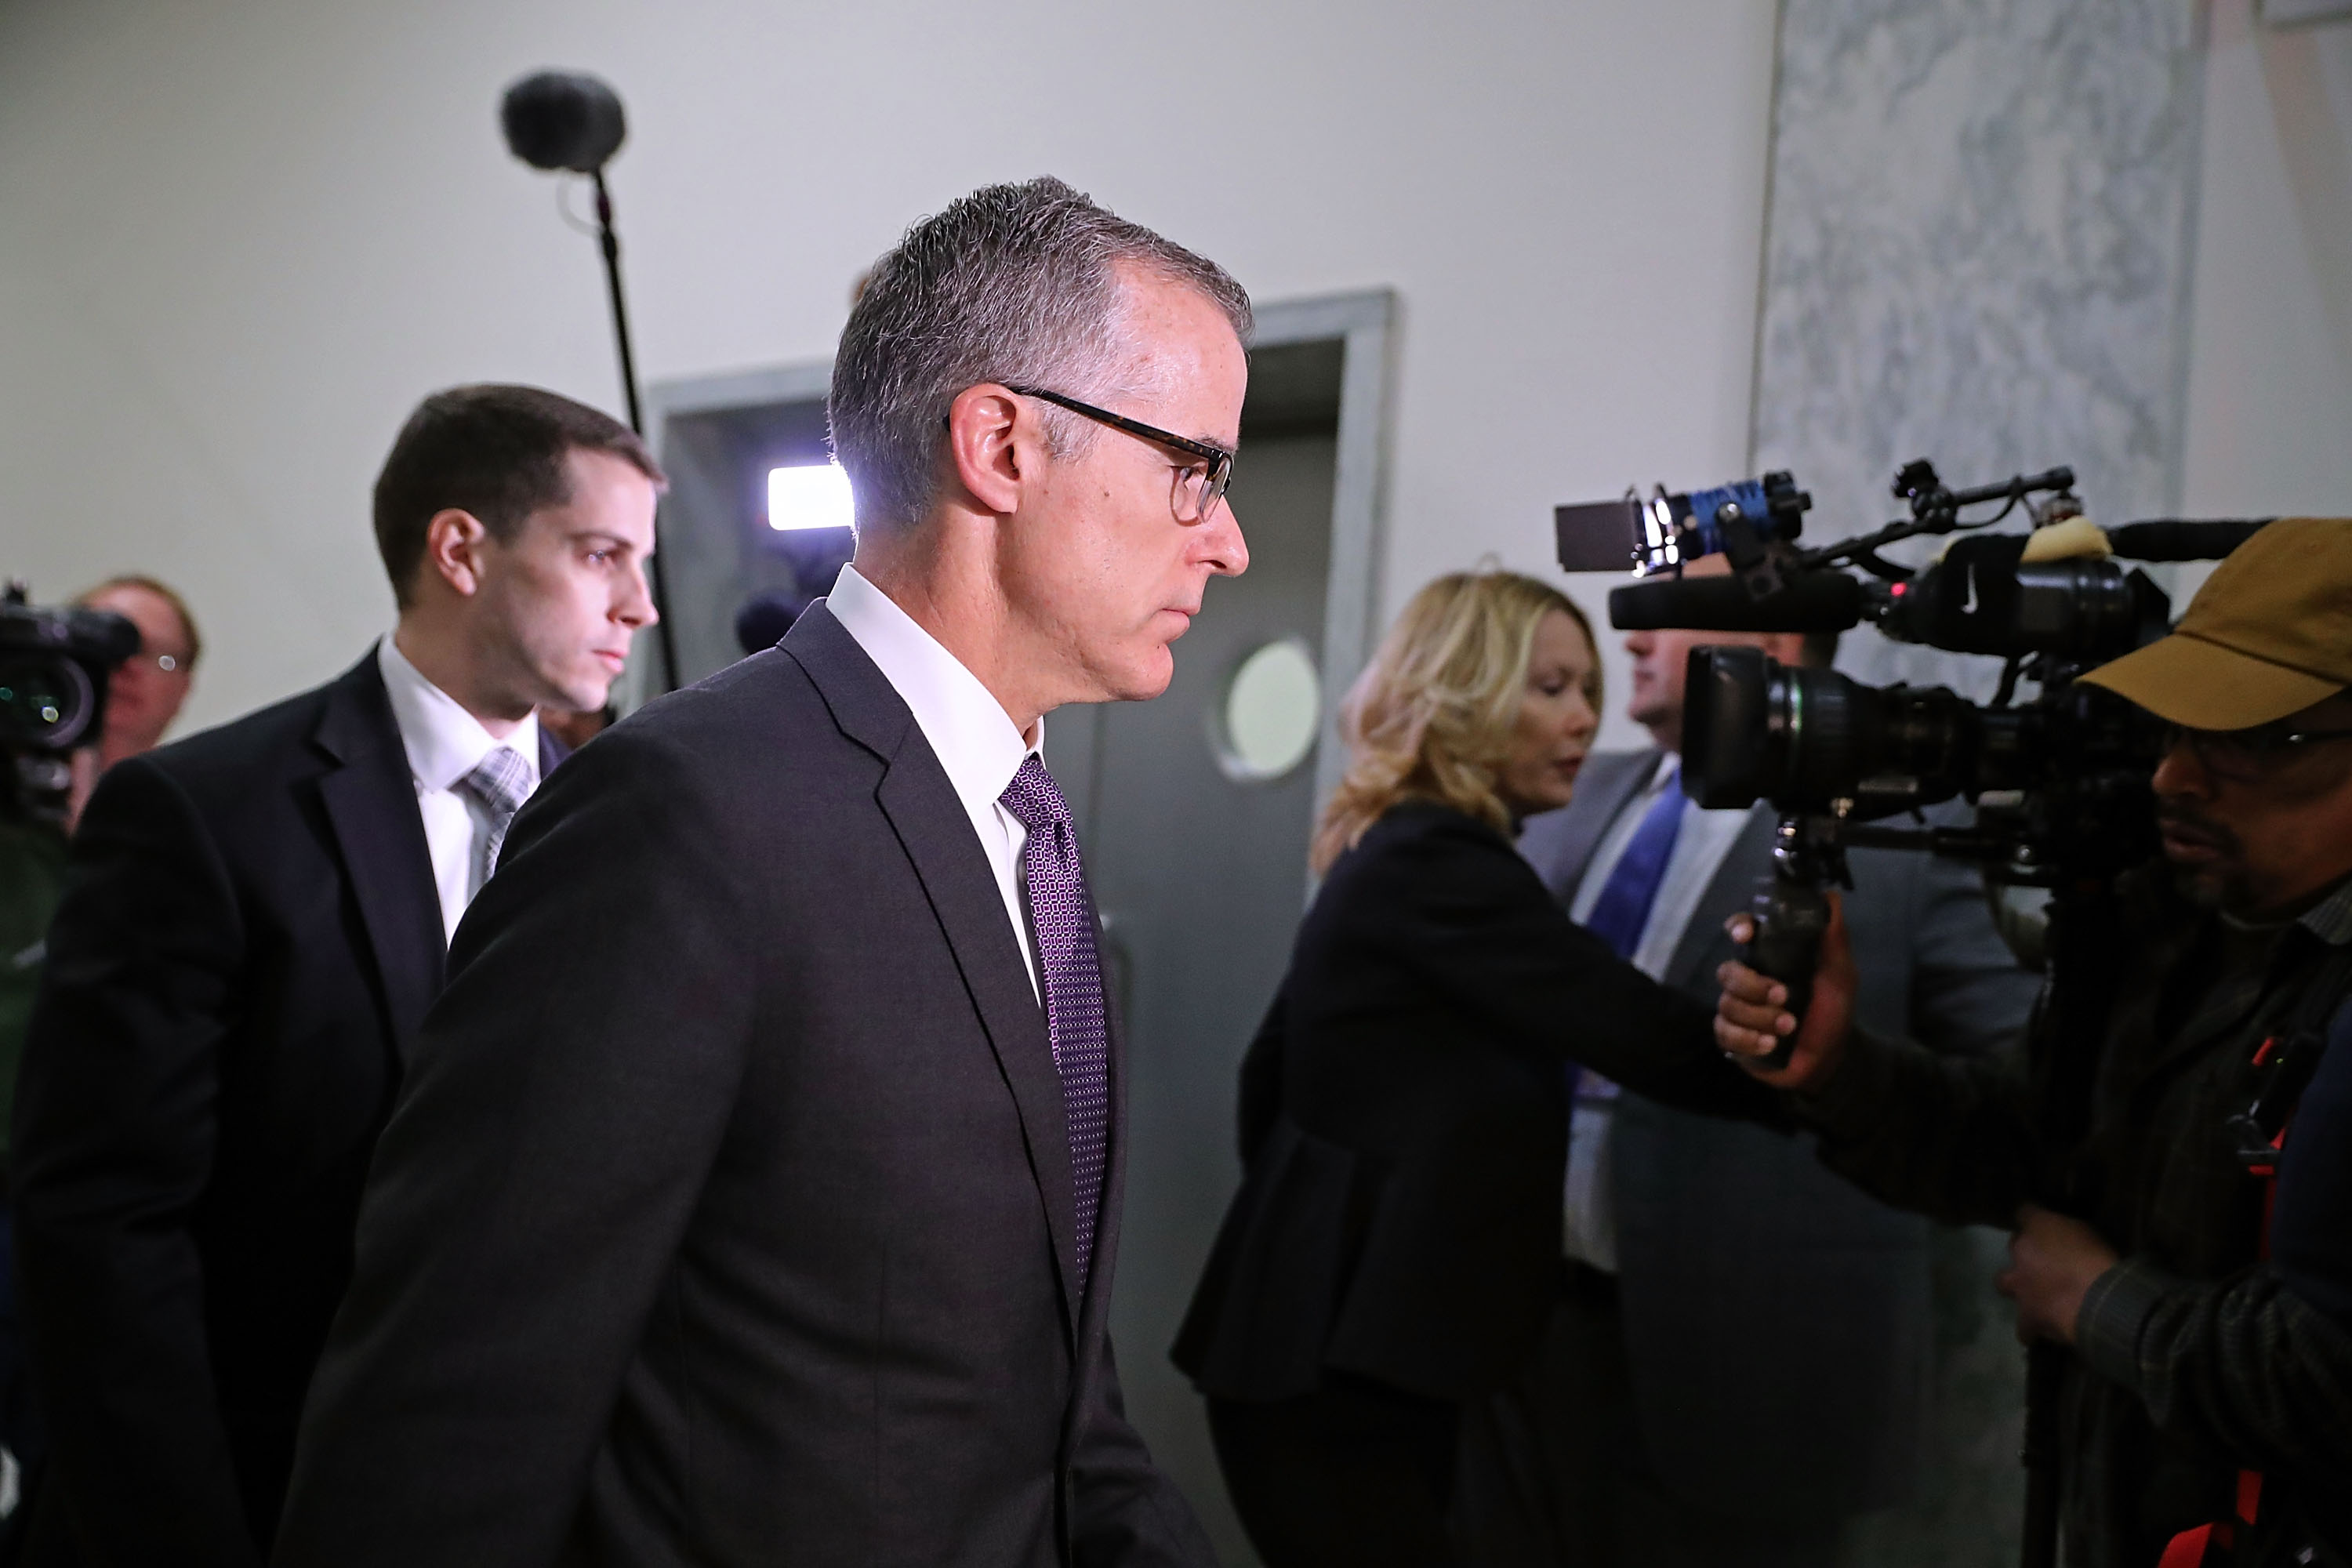 Deputy FBI Director Andrew McCabe Interviewed By House Judiciary Committee